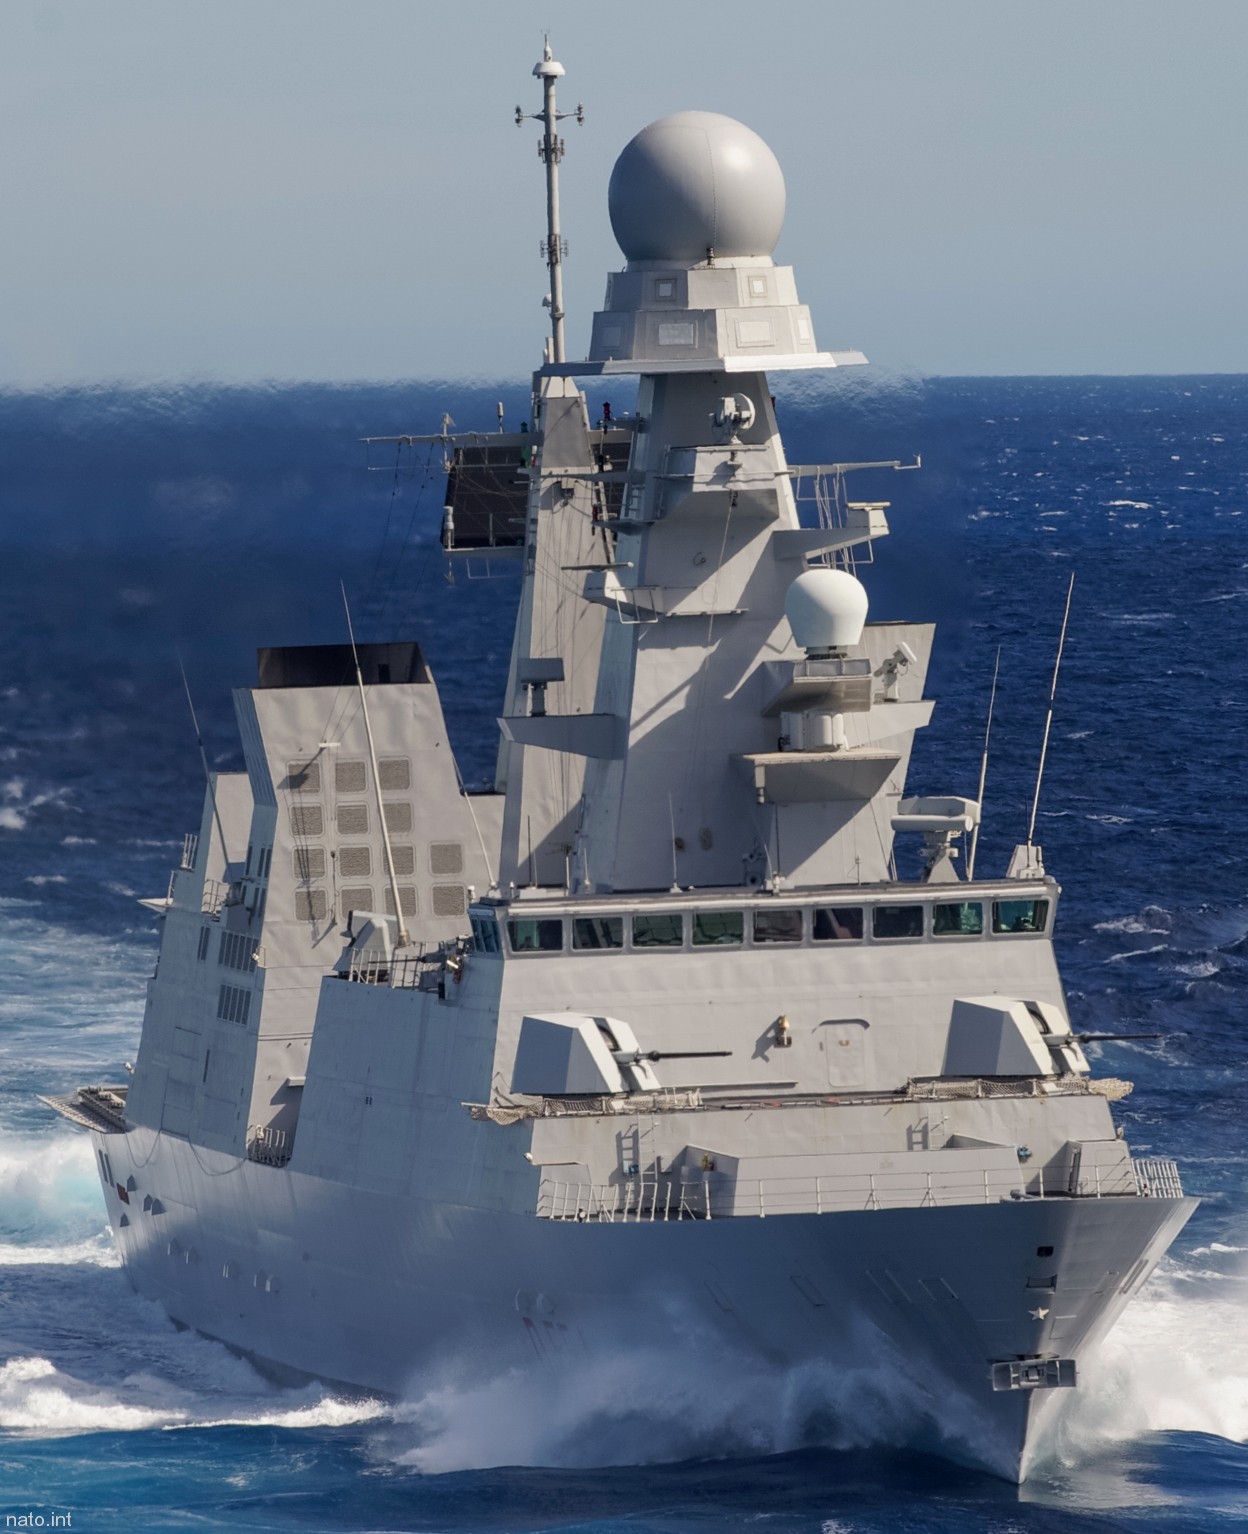 d-554 caio duilio its nave horizon class guided missile destroyer italian navy 09a